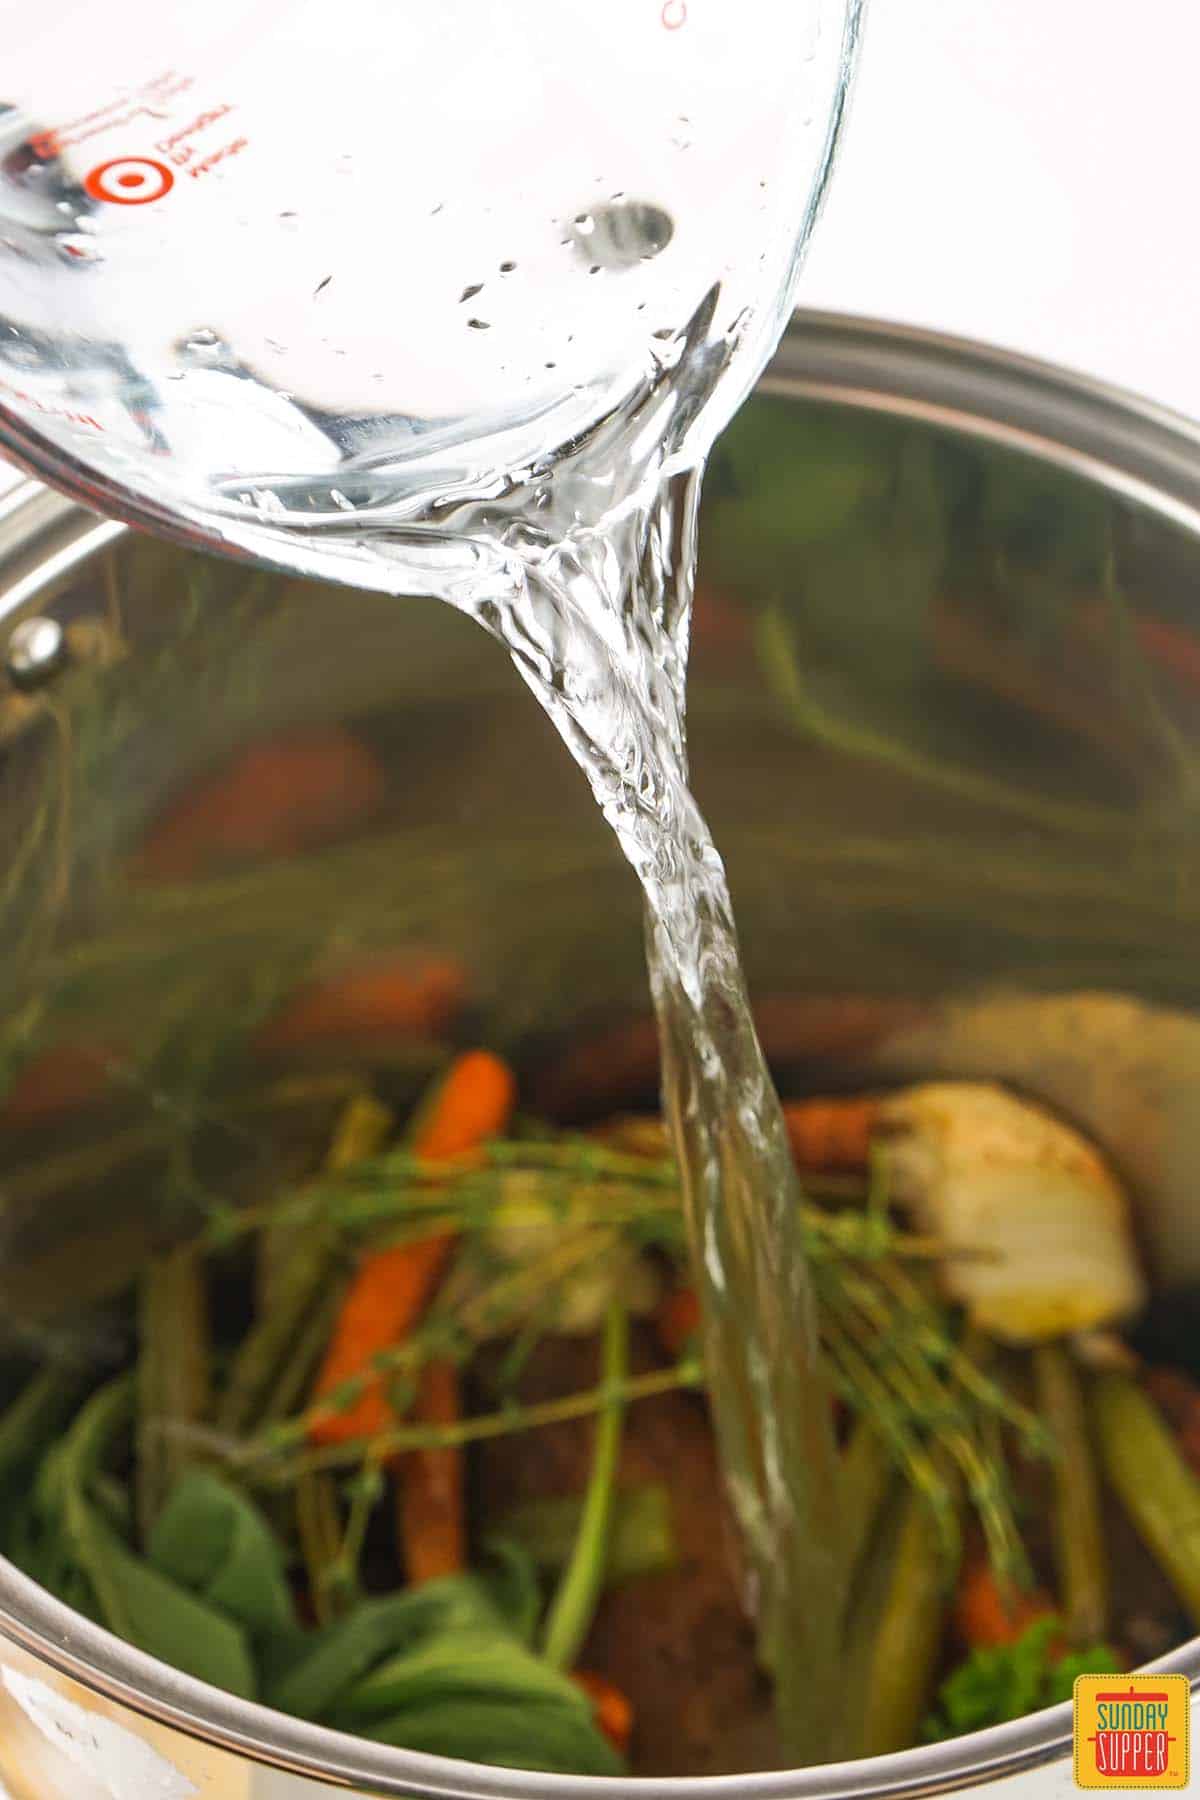 pouring water into the pot of veggies, herbs, and turkey